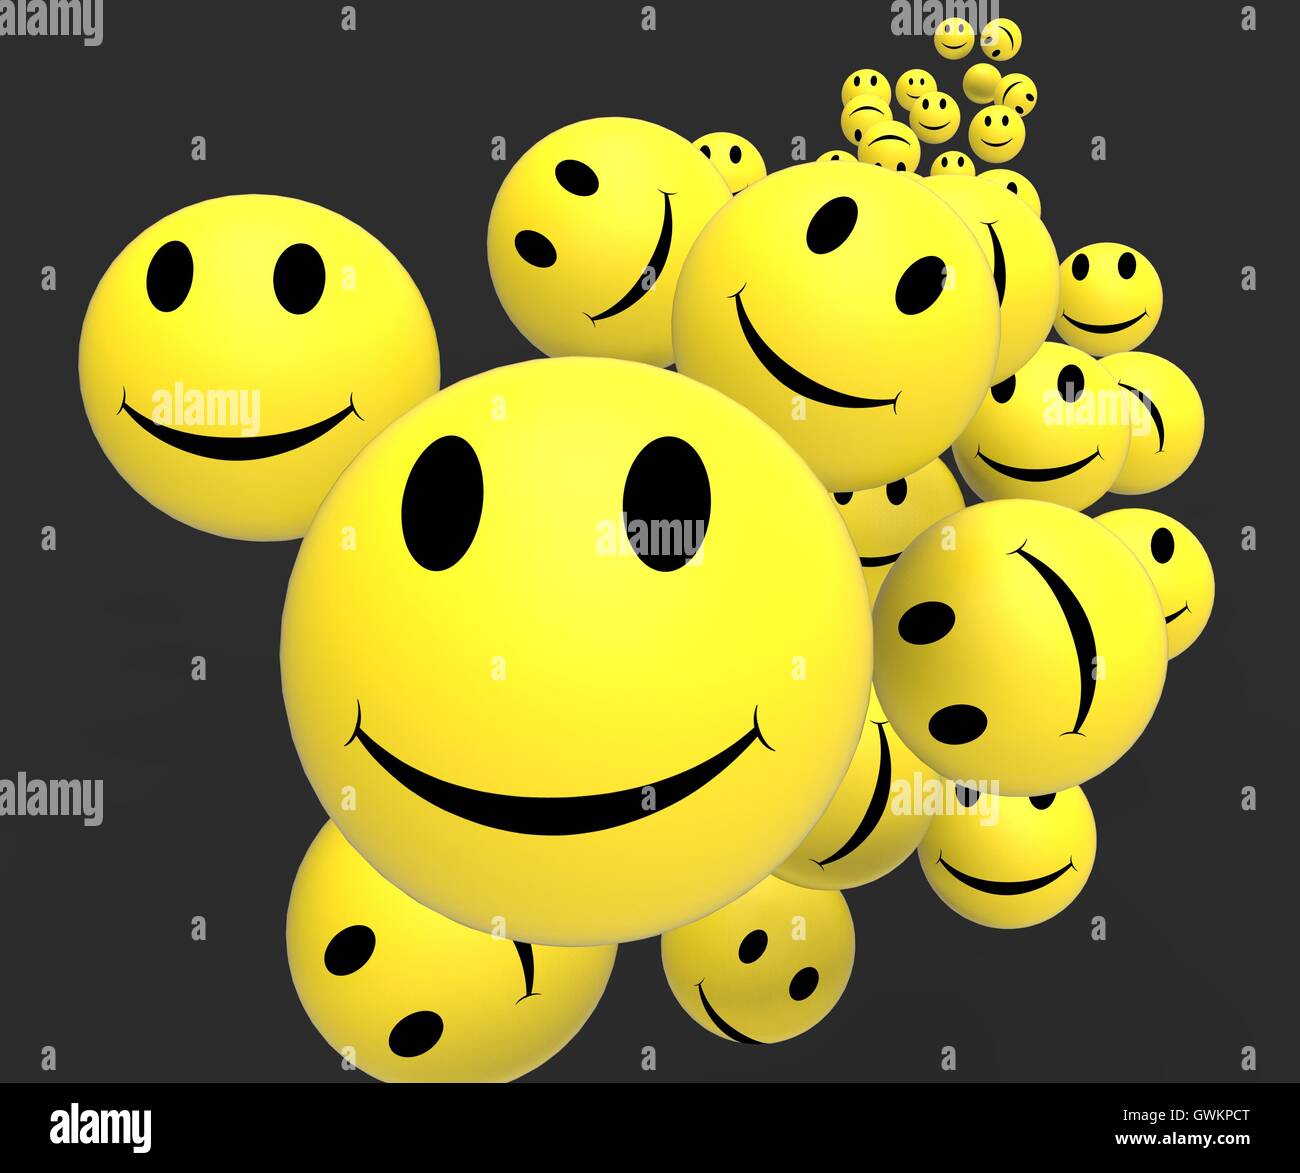 Smileys Showing Happy Positive Faces Stock Photo